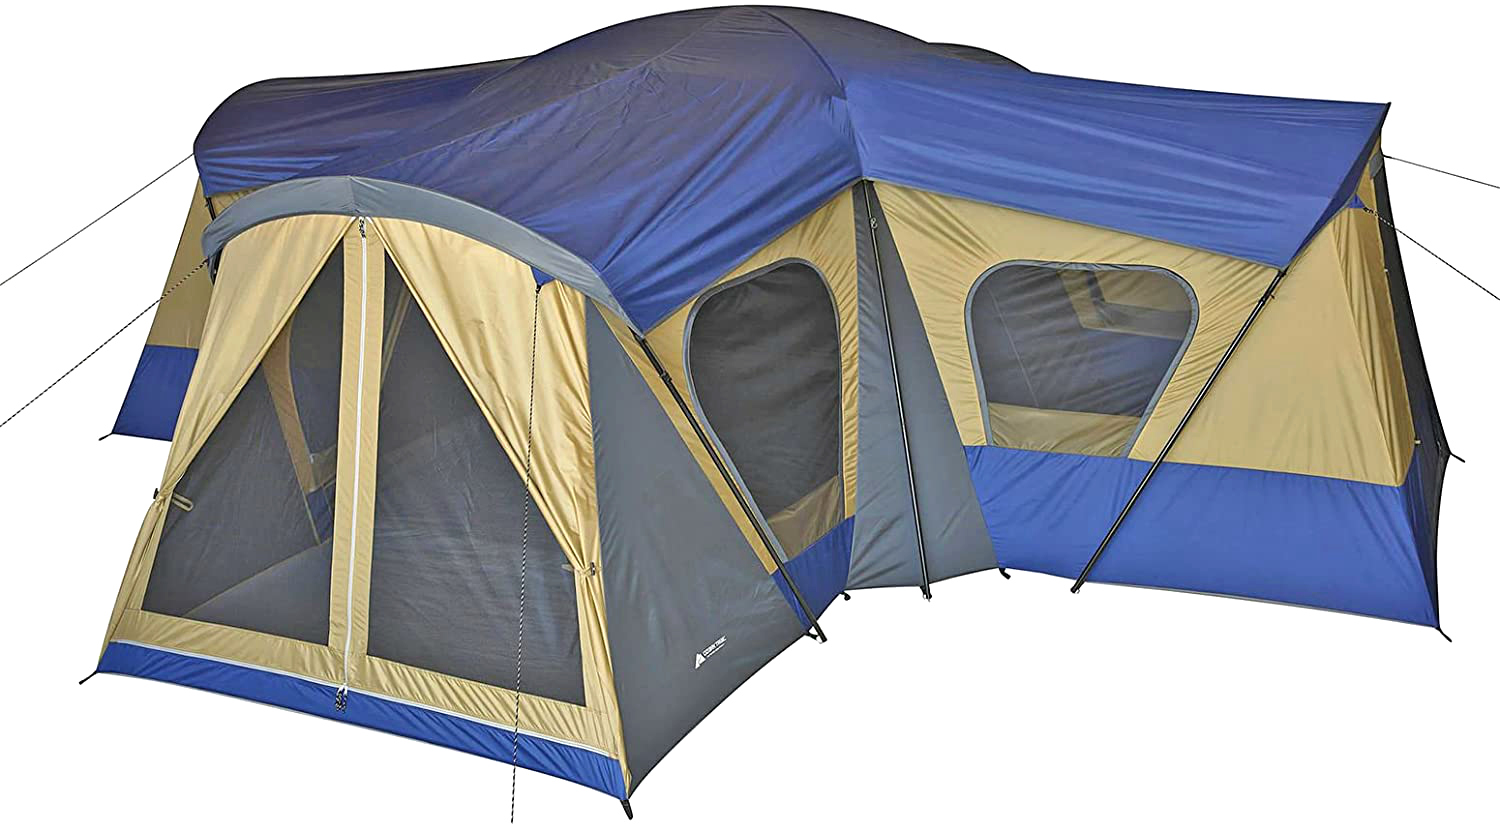 best-camping-tents